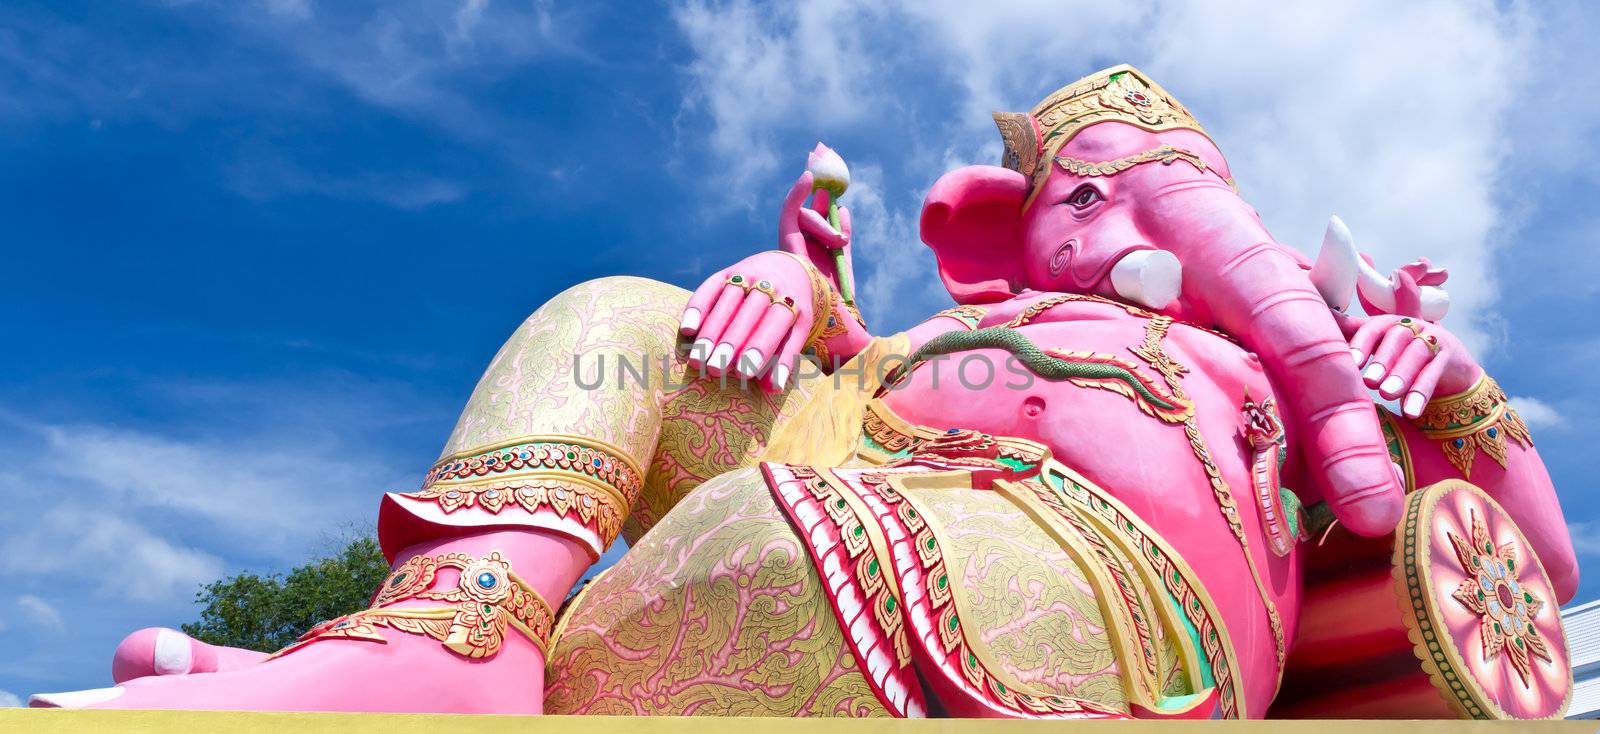 pink ganesha largest statue in Thailand by tungphoto